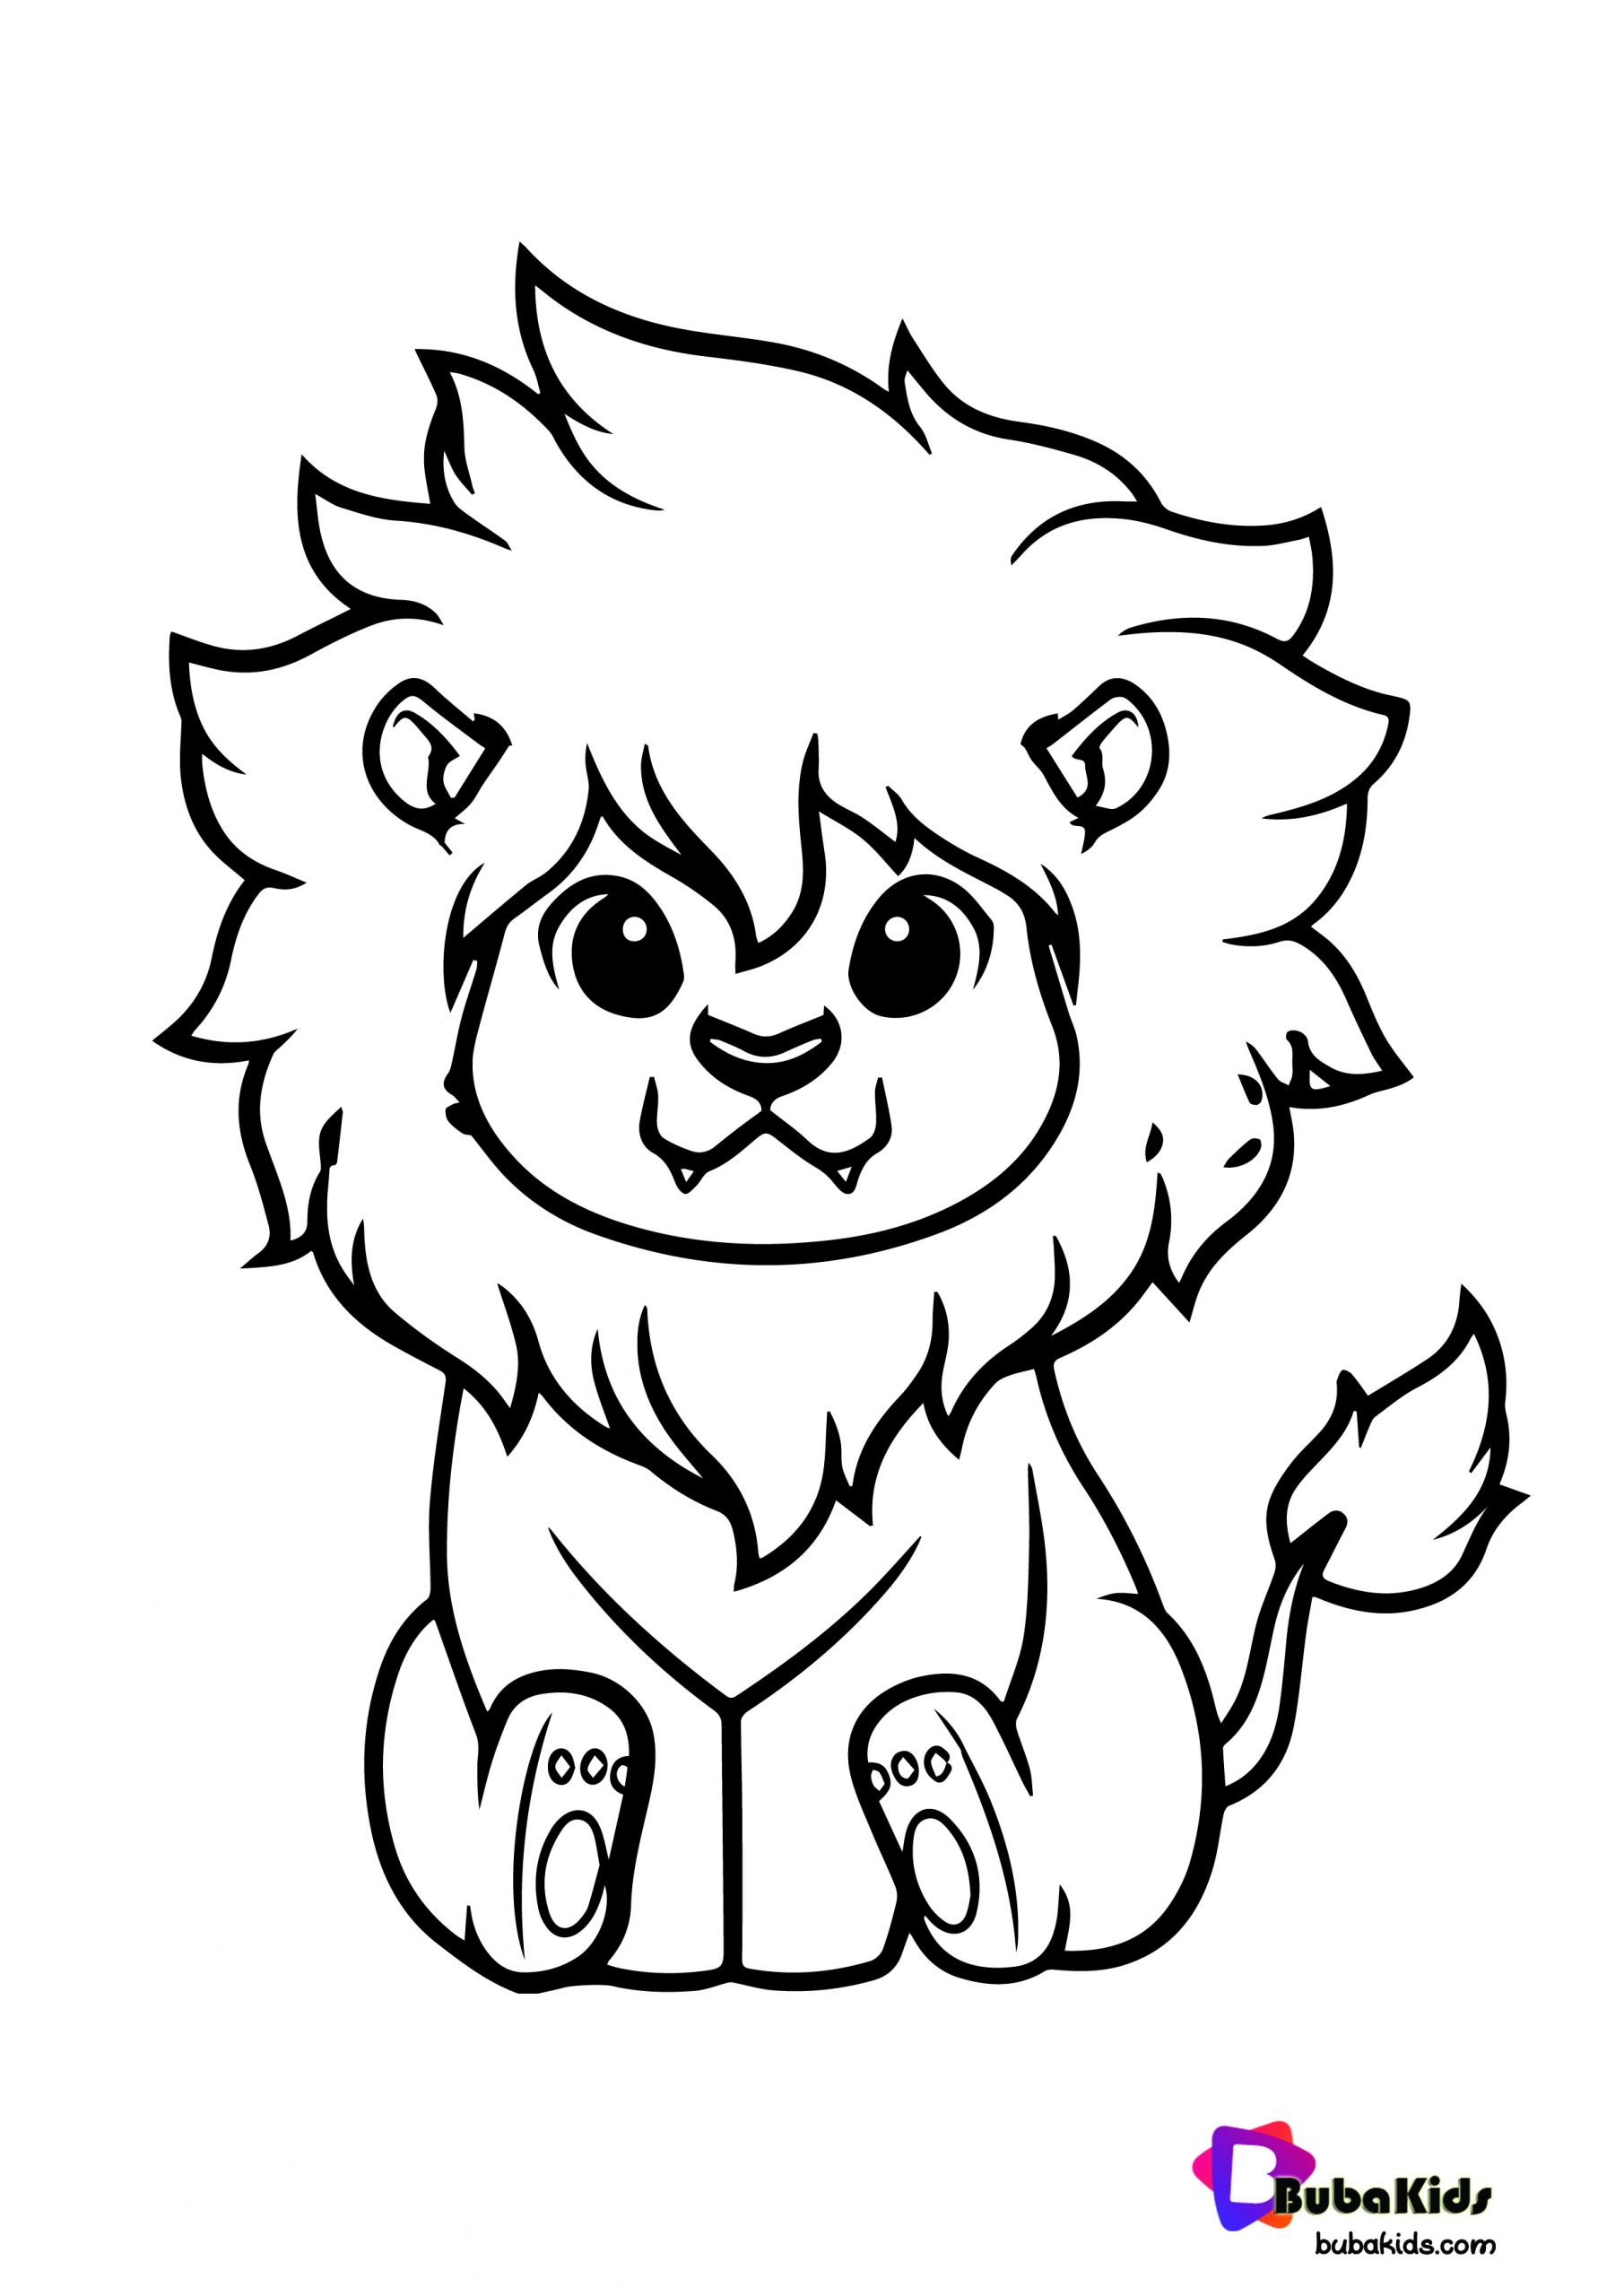 Cute Lion King Coloring Page Wallpaper